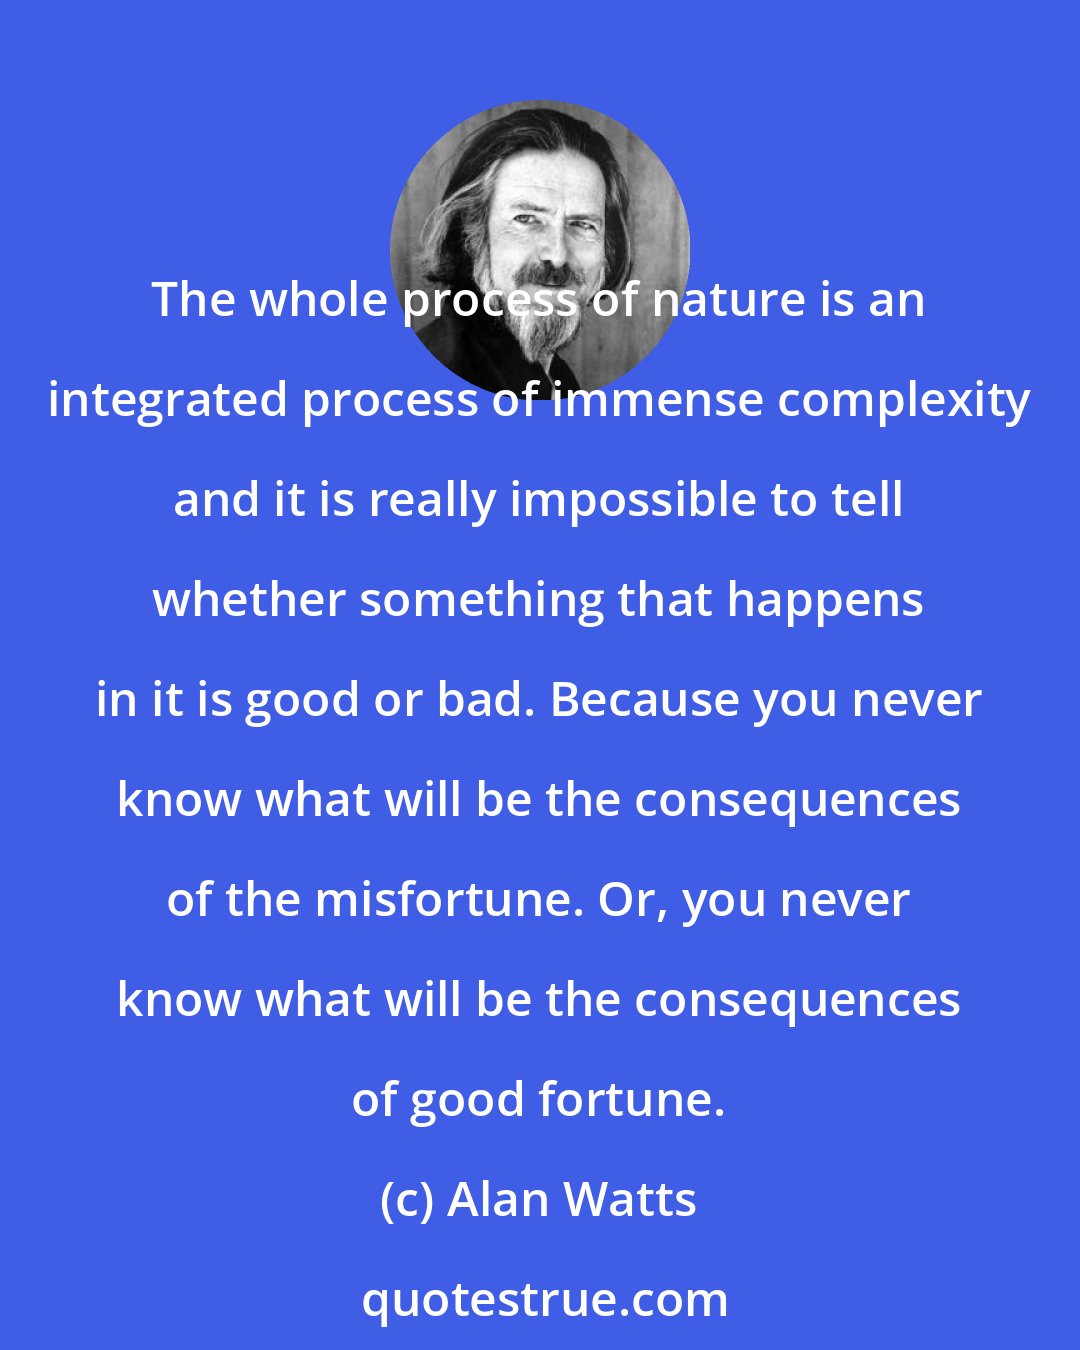 Alan Watts: The whole process of nature is an integrated process of immense complexity and it is really impossible to tell whether something that happens in it is good or bad. Because you never know what will be the consequences of the misfortune. Or, you never know what will be the consequences of good fortune.